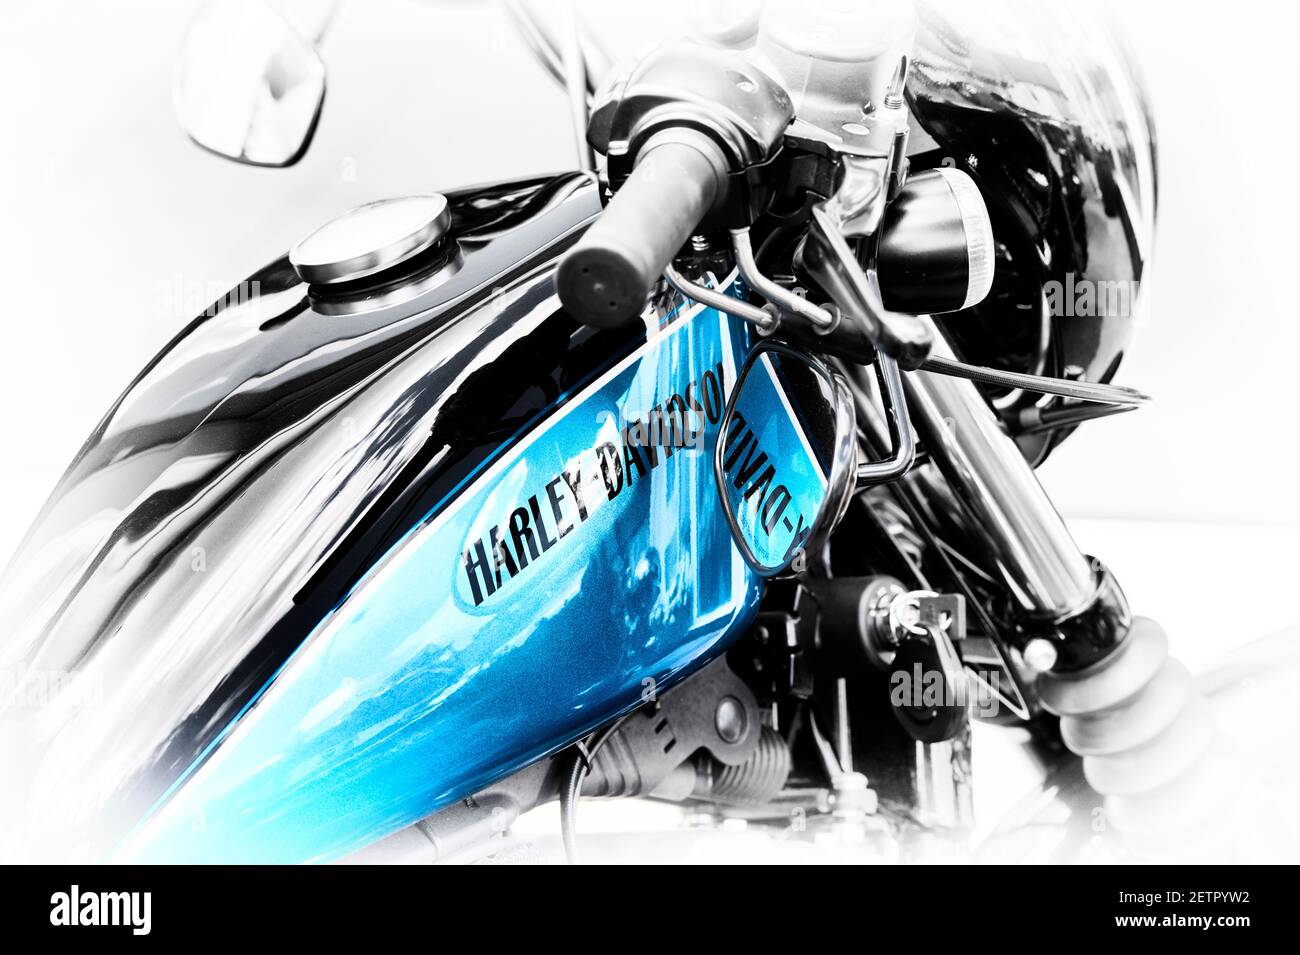 Harley Davidson Sportster Motorcycle Abstract. Blue Toned Black and White Stock Photo